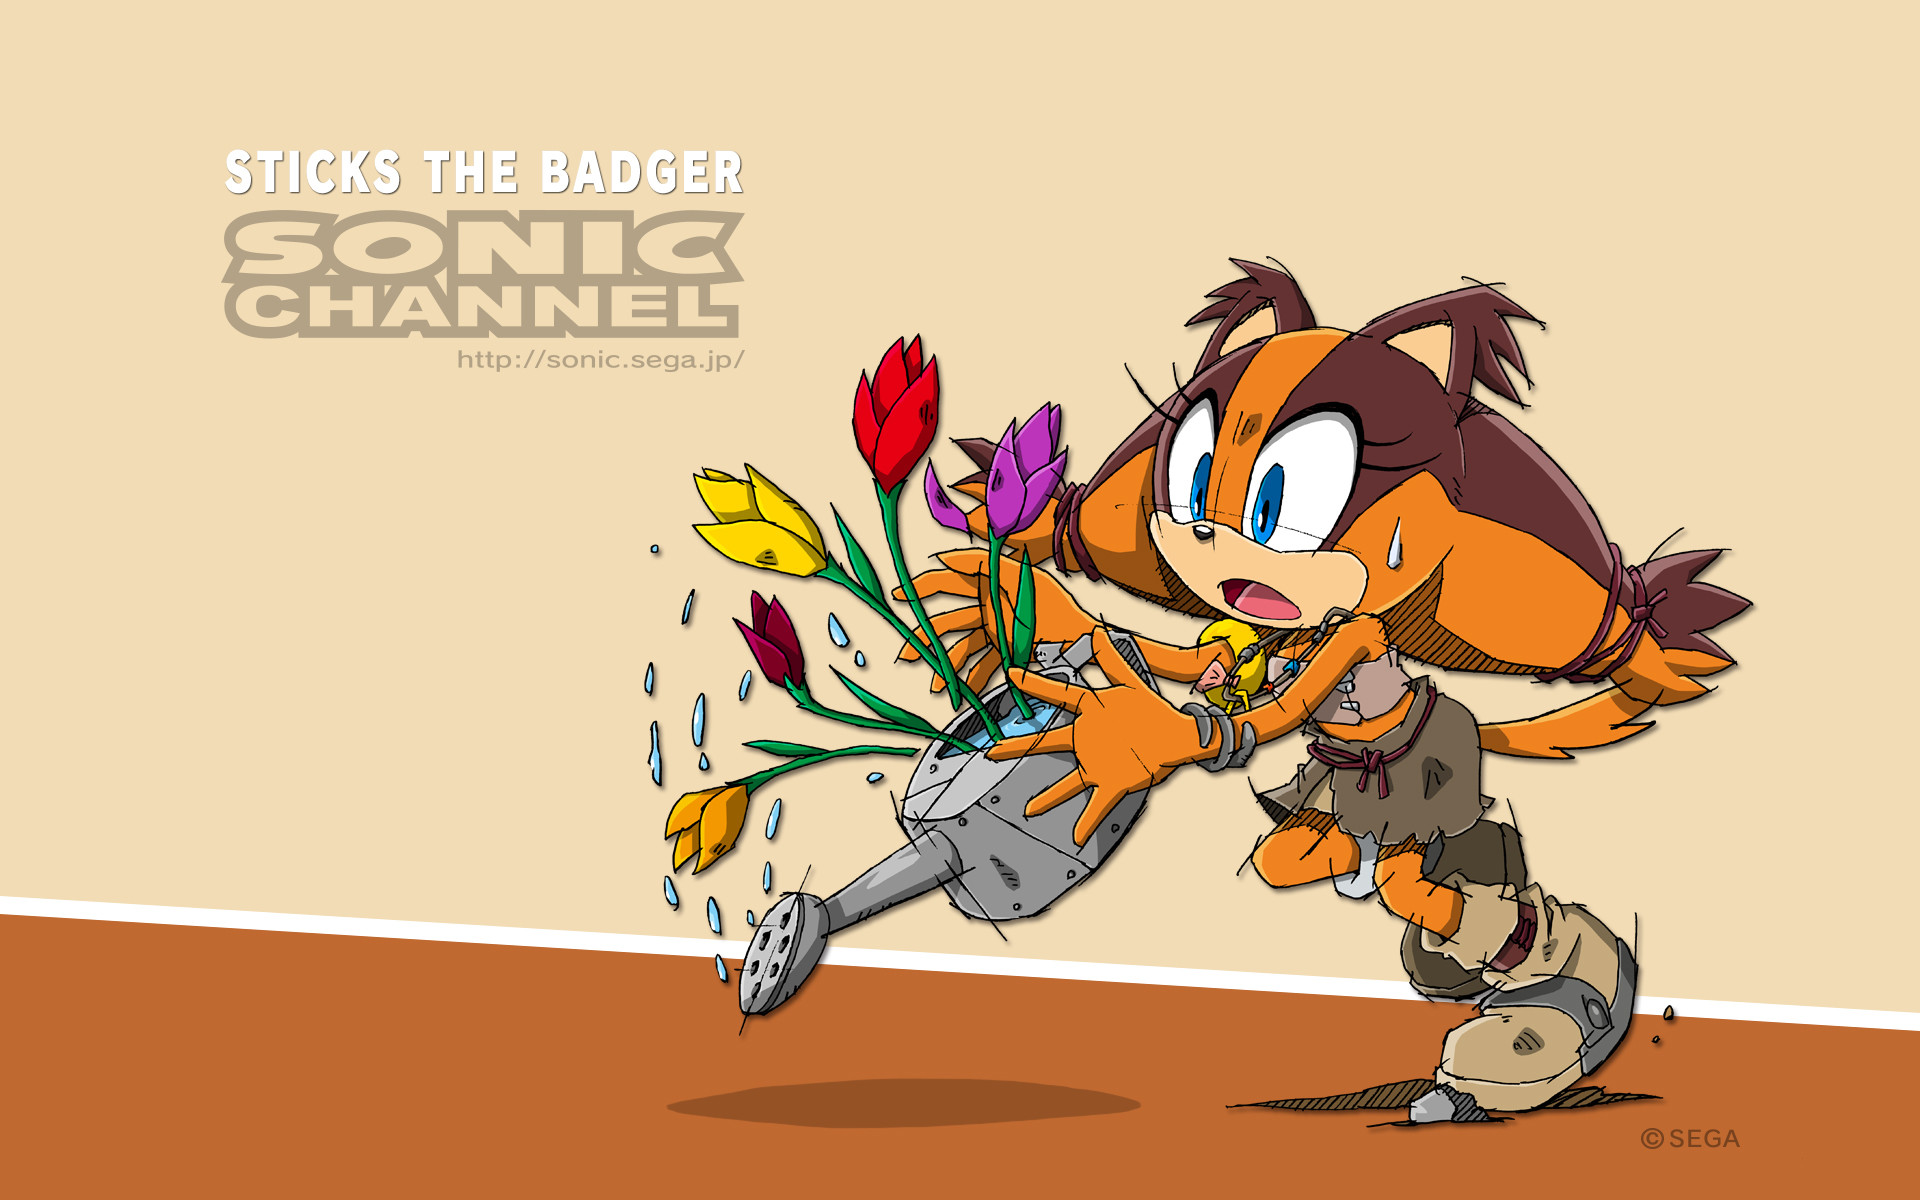 1920x1200 Wallpapers - Sonic Channel | Last Minute Continue